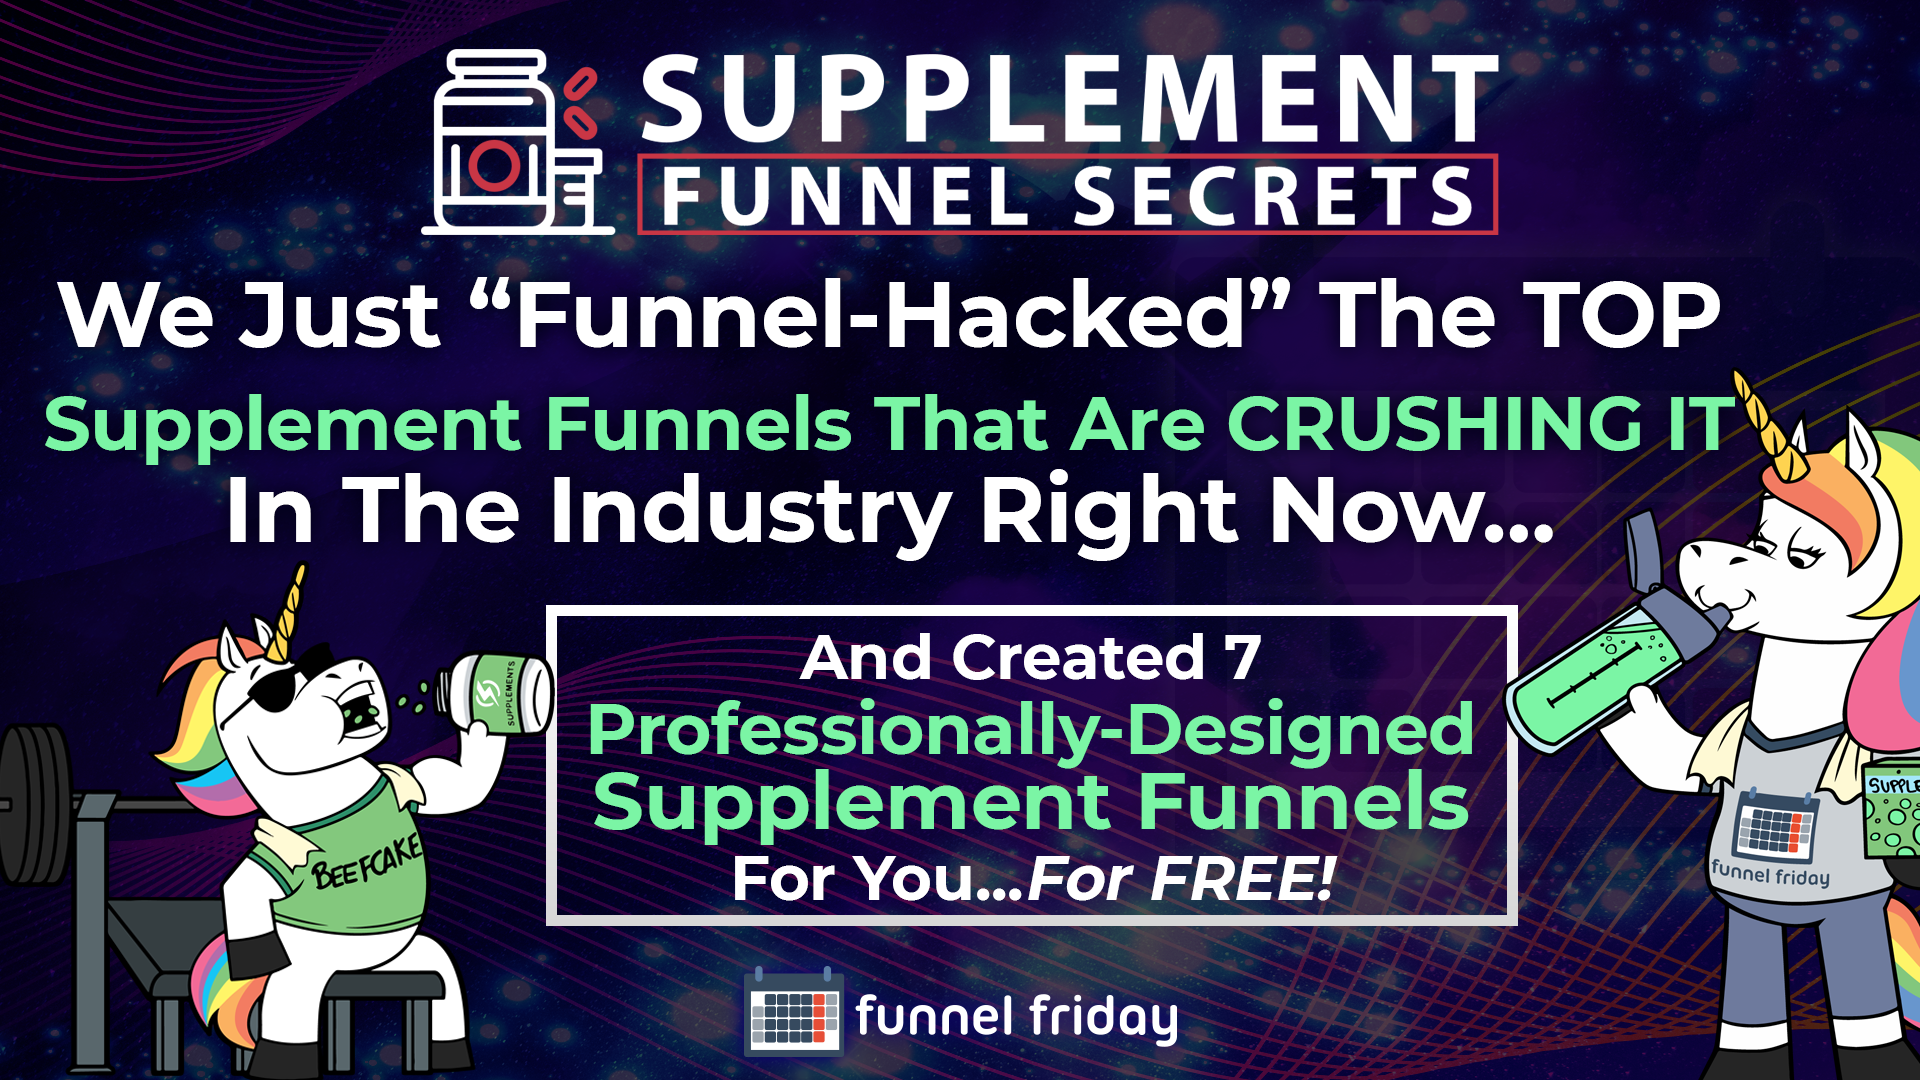 https://funnelfridays.com/hosted/images/7a/7c08fa8ac94c03aa4ab2115a8a1bfa/FF_Slides_TitleSFS.png